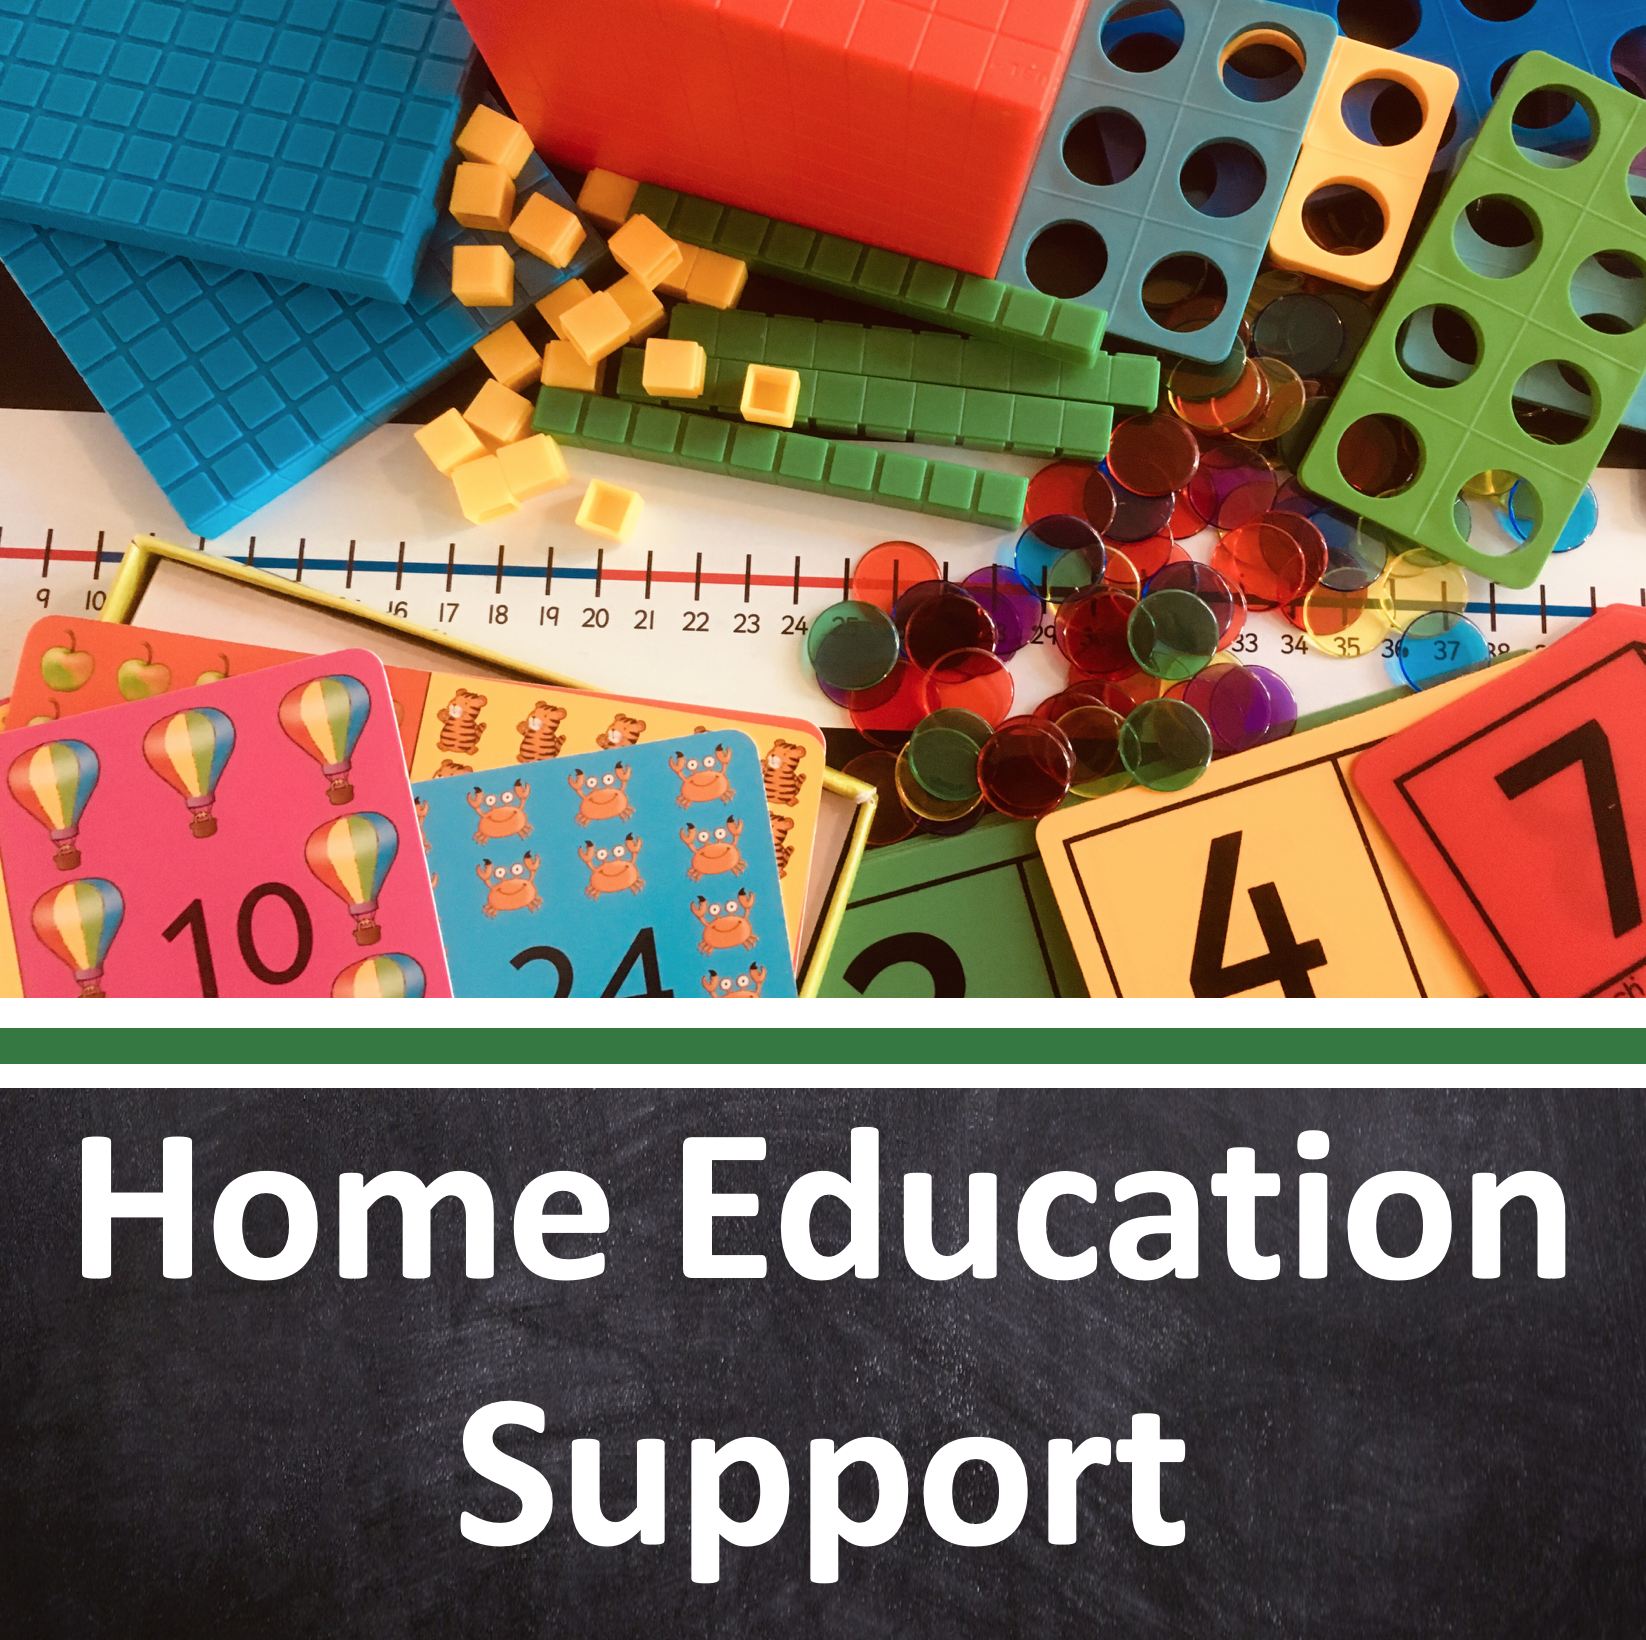 Home Education Support